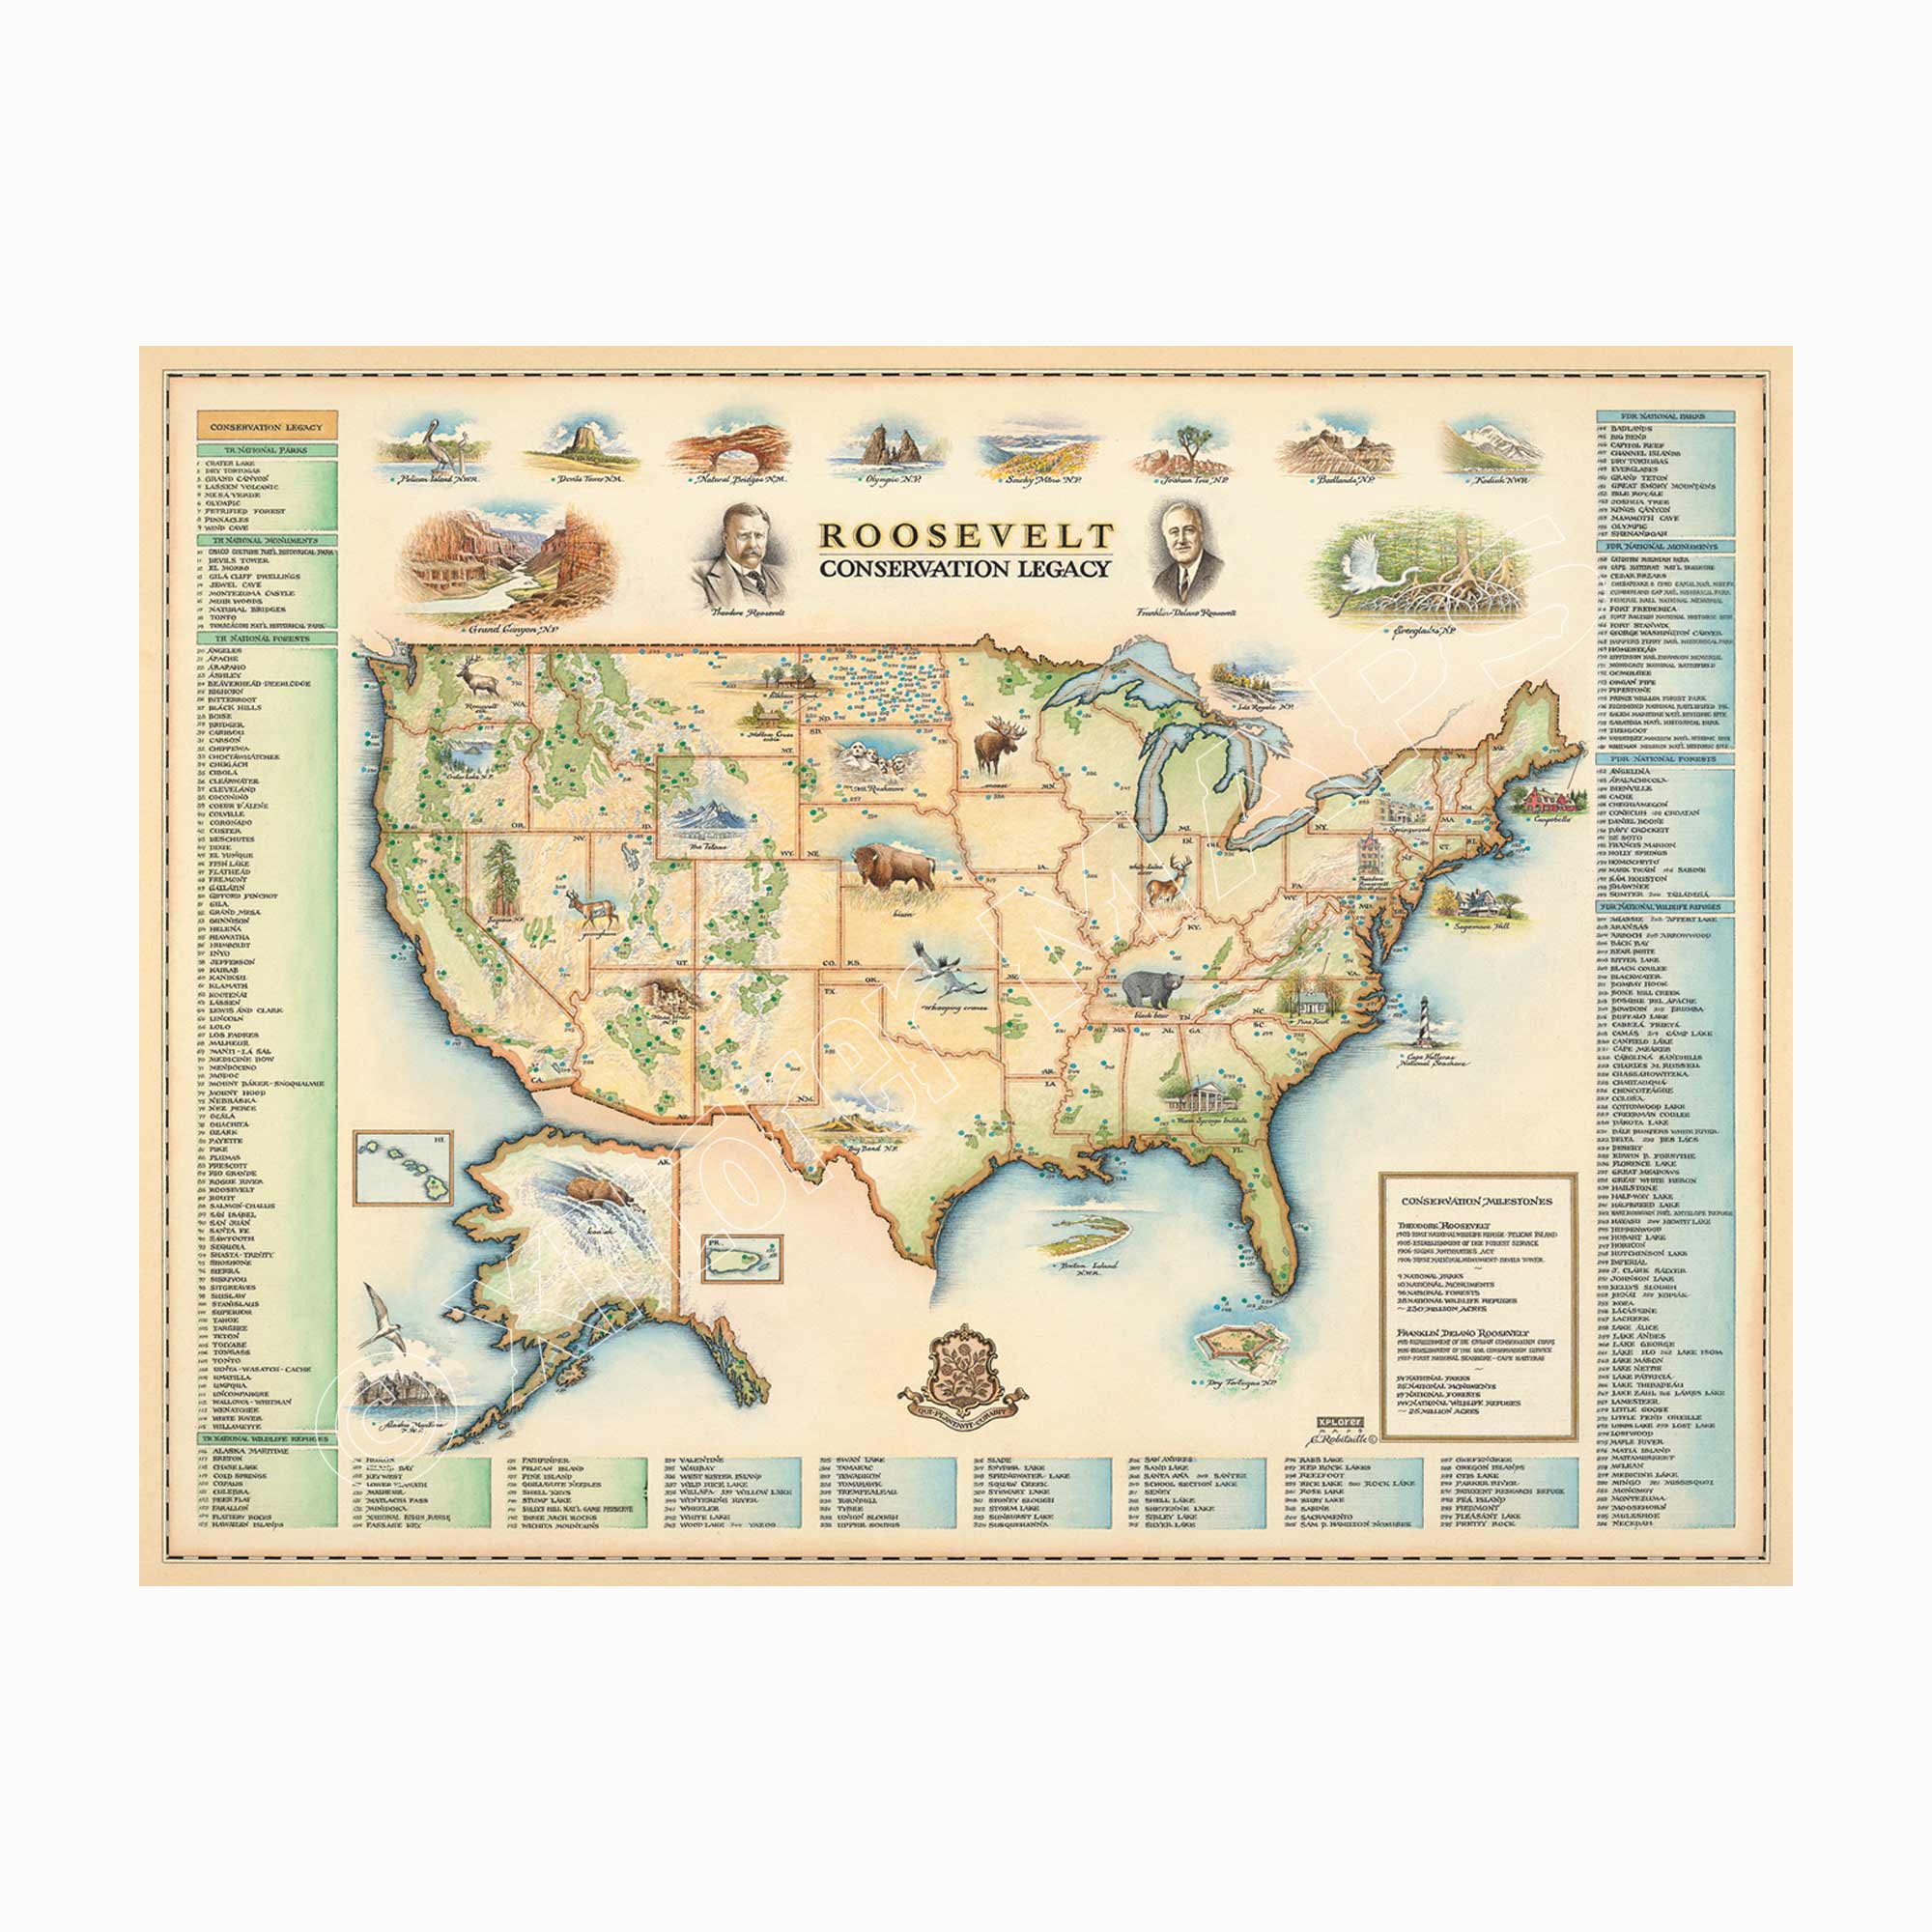 Roosevelt's USA Conservation Legacy hand-drawn map in earth tones beige and green. The map features the United States of America with significant features of each state. Some illustrations include Mesa Verde National Park in Colorado, Campobello in Maine, Mount Rushmore, and Grand Canyon National Park. The map is numbered with corresponding explanations of places featured on the map. Measures 24x18.